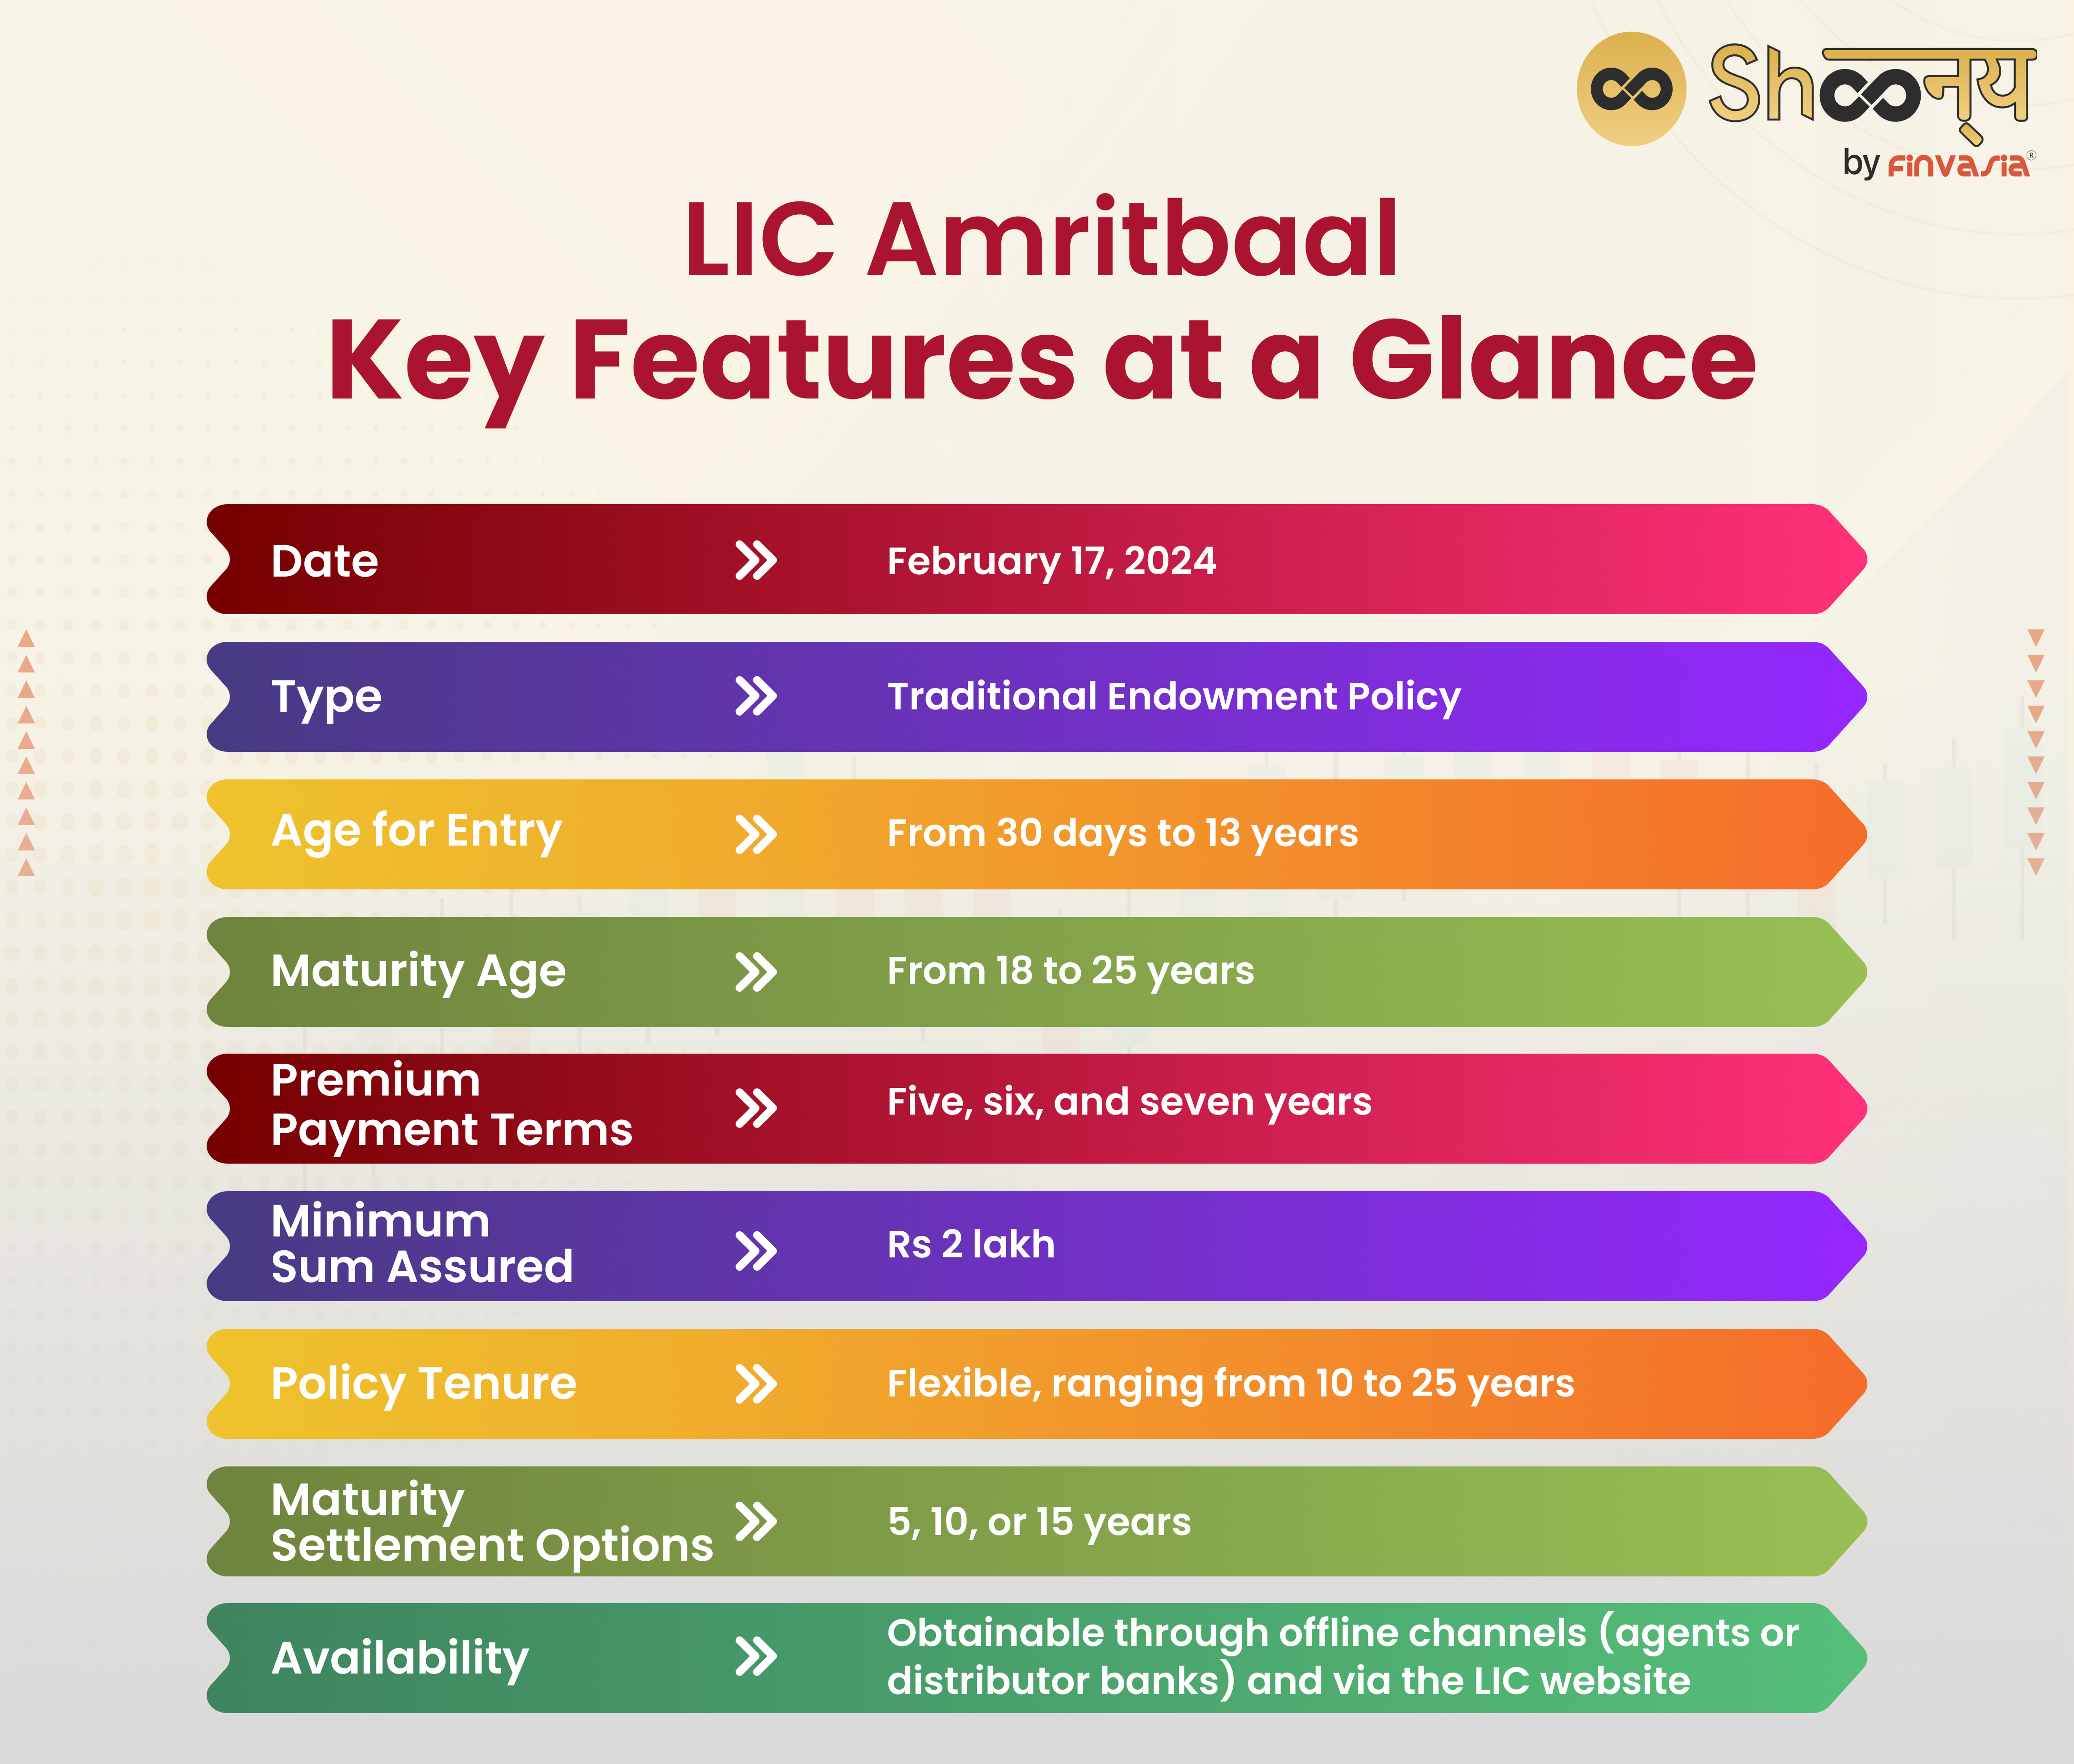 LIC Amritbaal: Key Features at a Glance